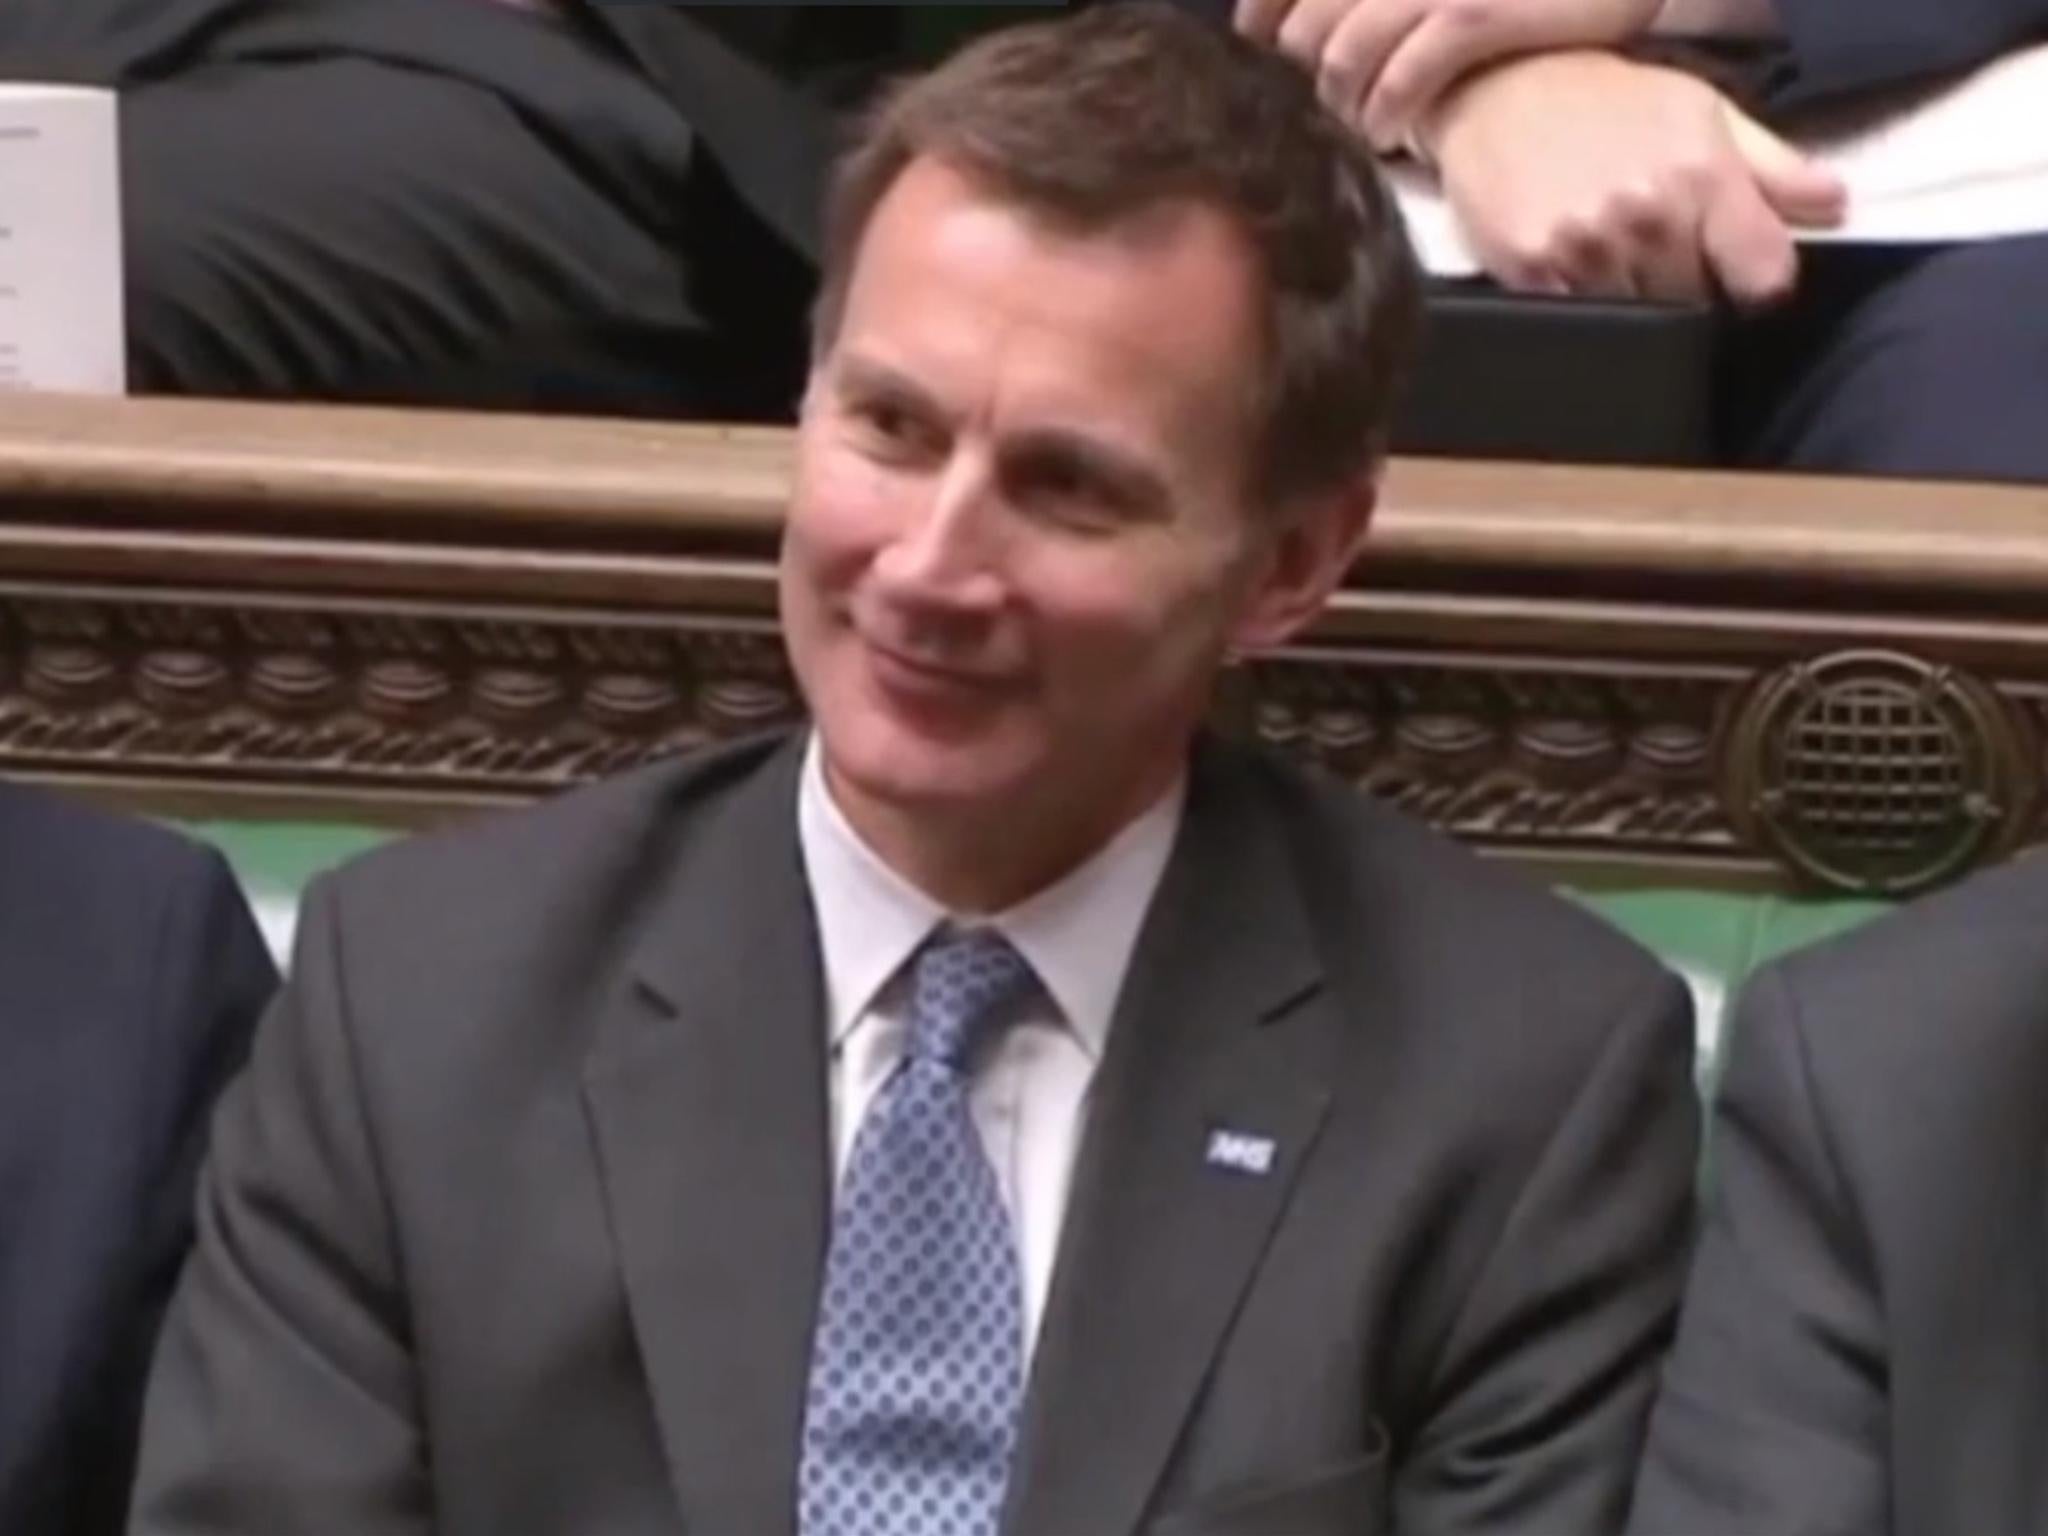 Jeremy Hunt during PMQs on 8 February